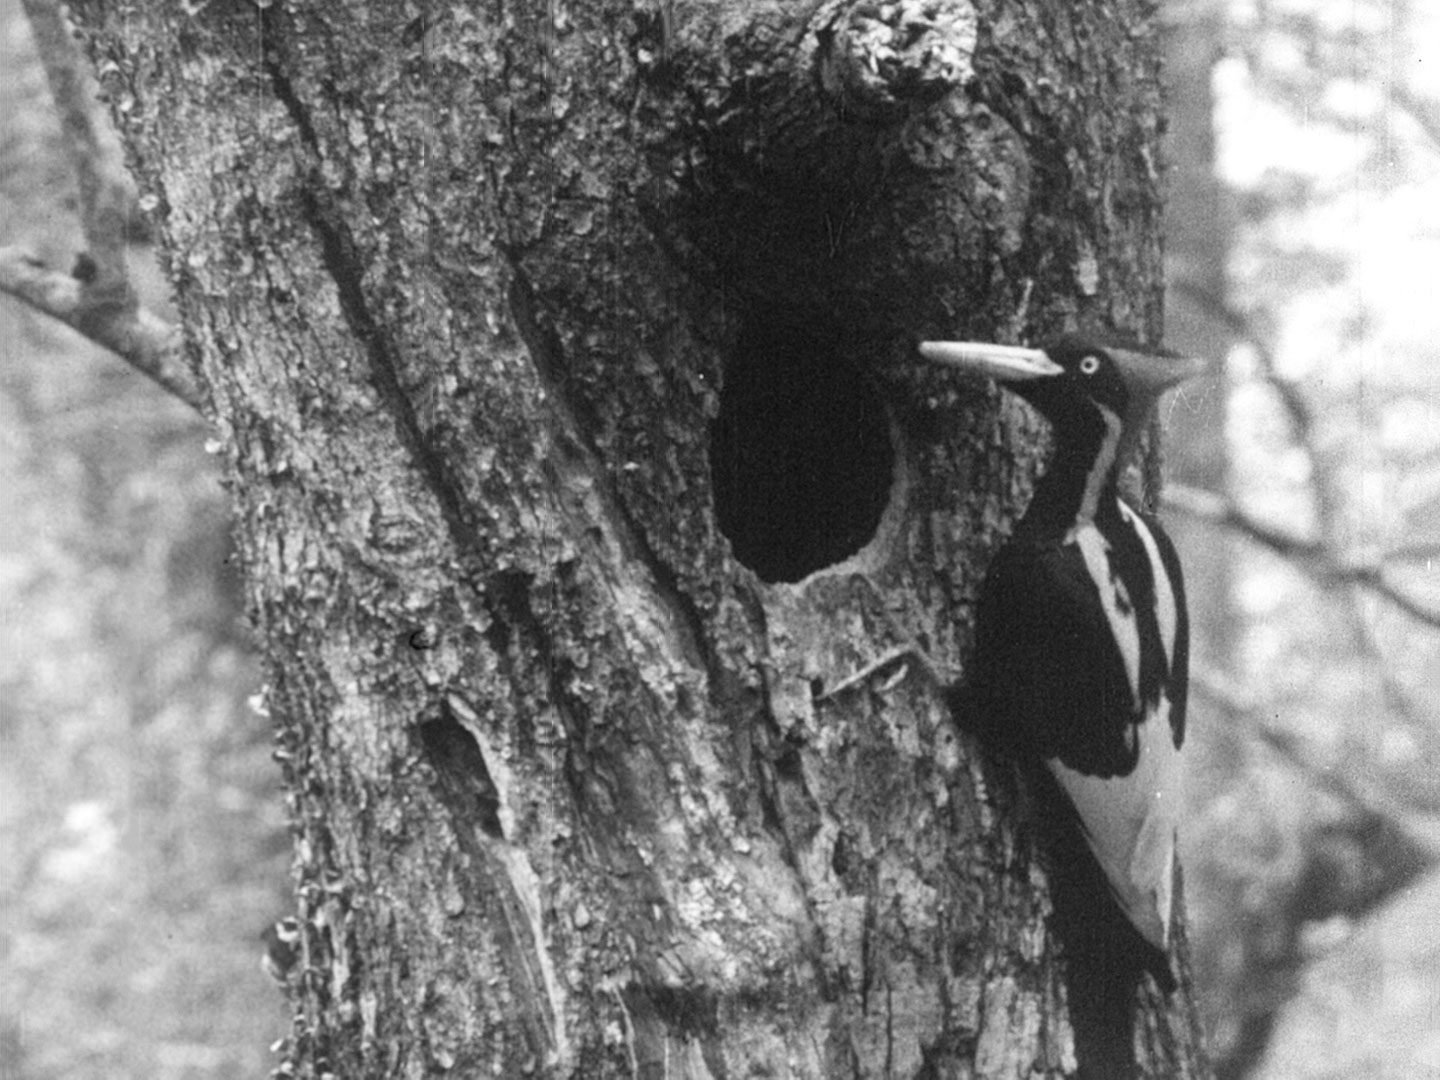 One of the only photos of the Ivory-billed Woodpecker, taken by the Cornell Lab